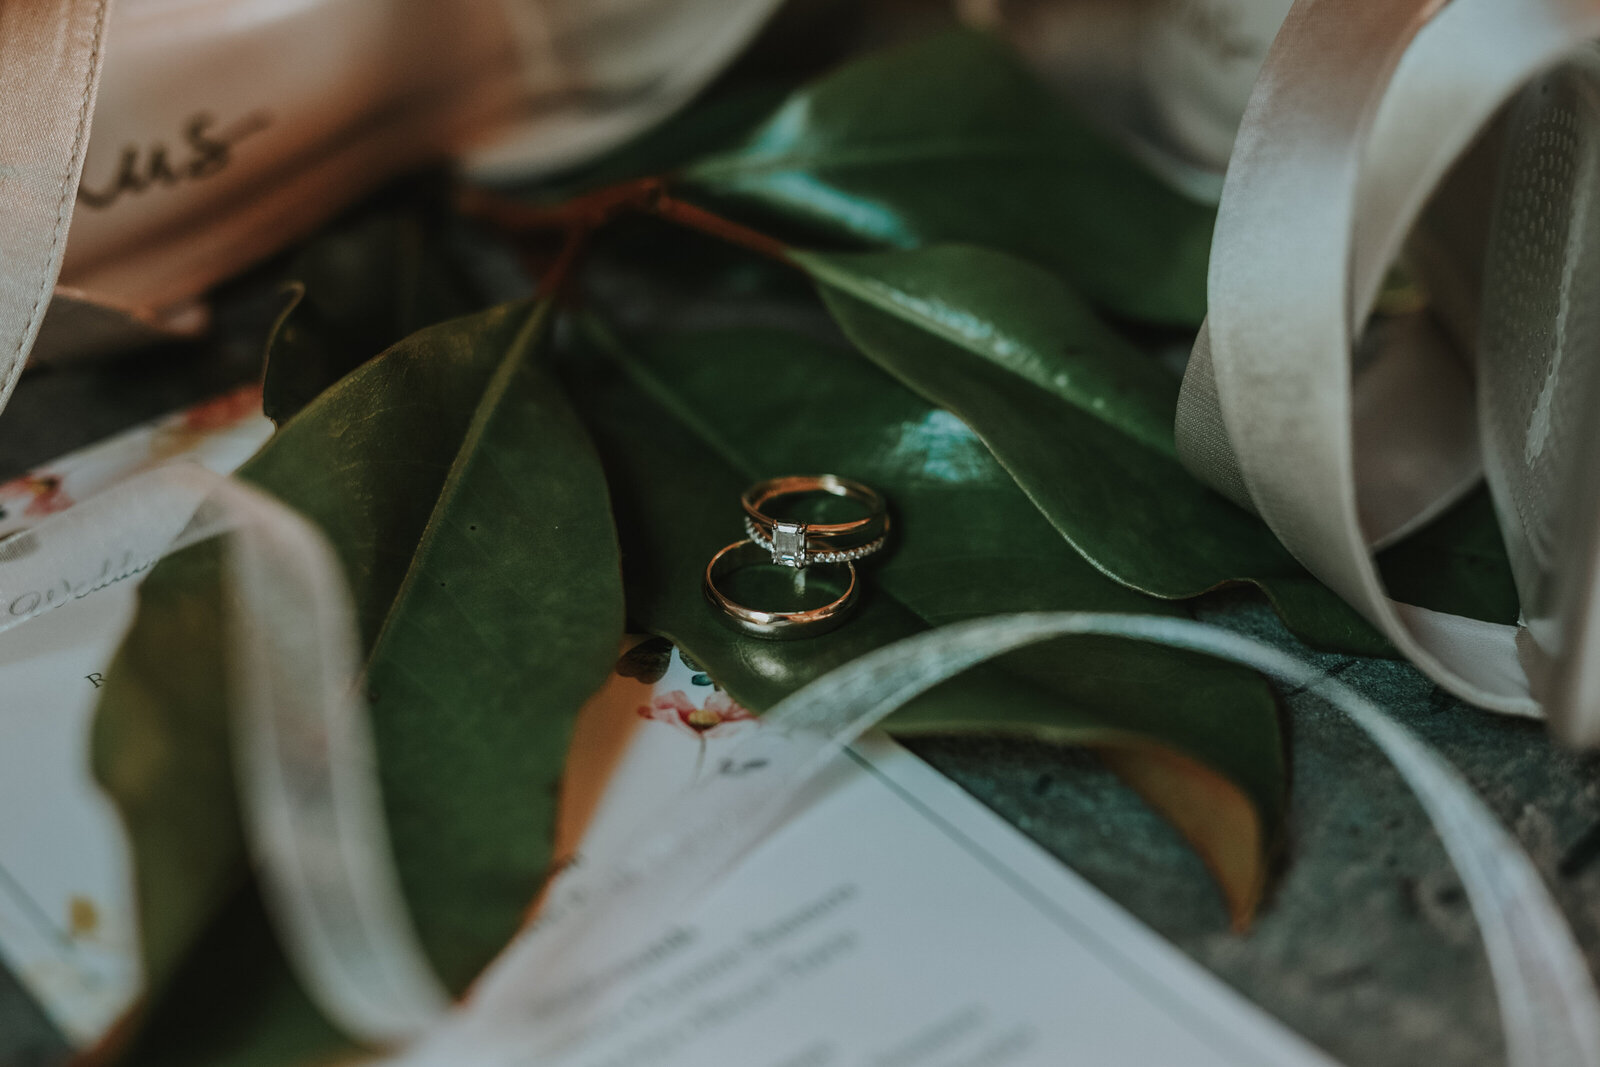 Shoes and wedding rings sit on top of a large leaf